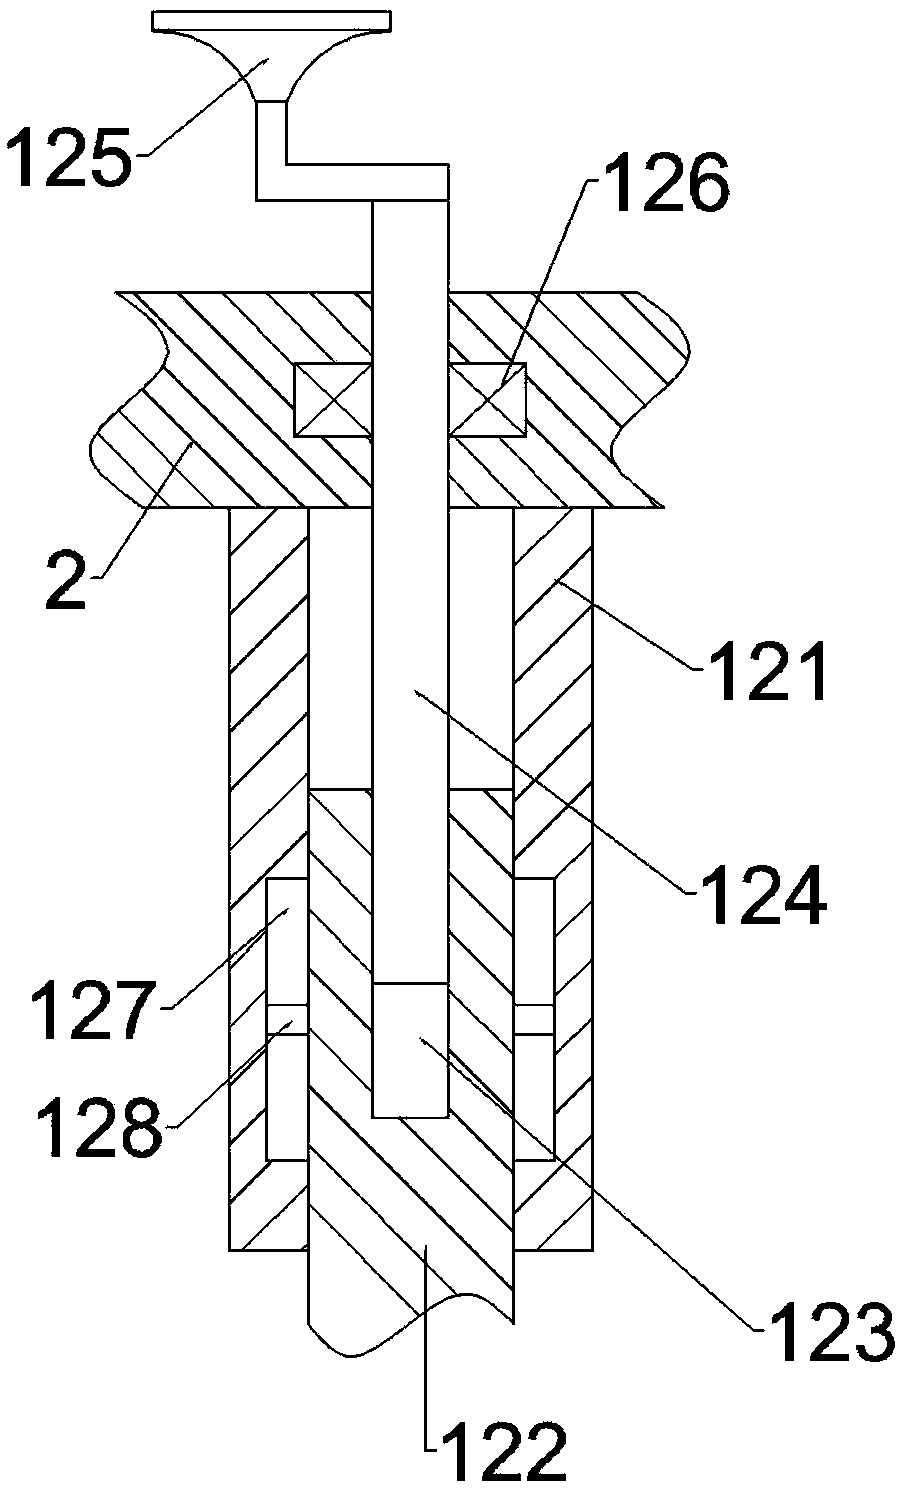 Computer hardware installation device based on upper, lower, left, and right positioning principle